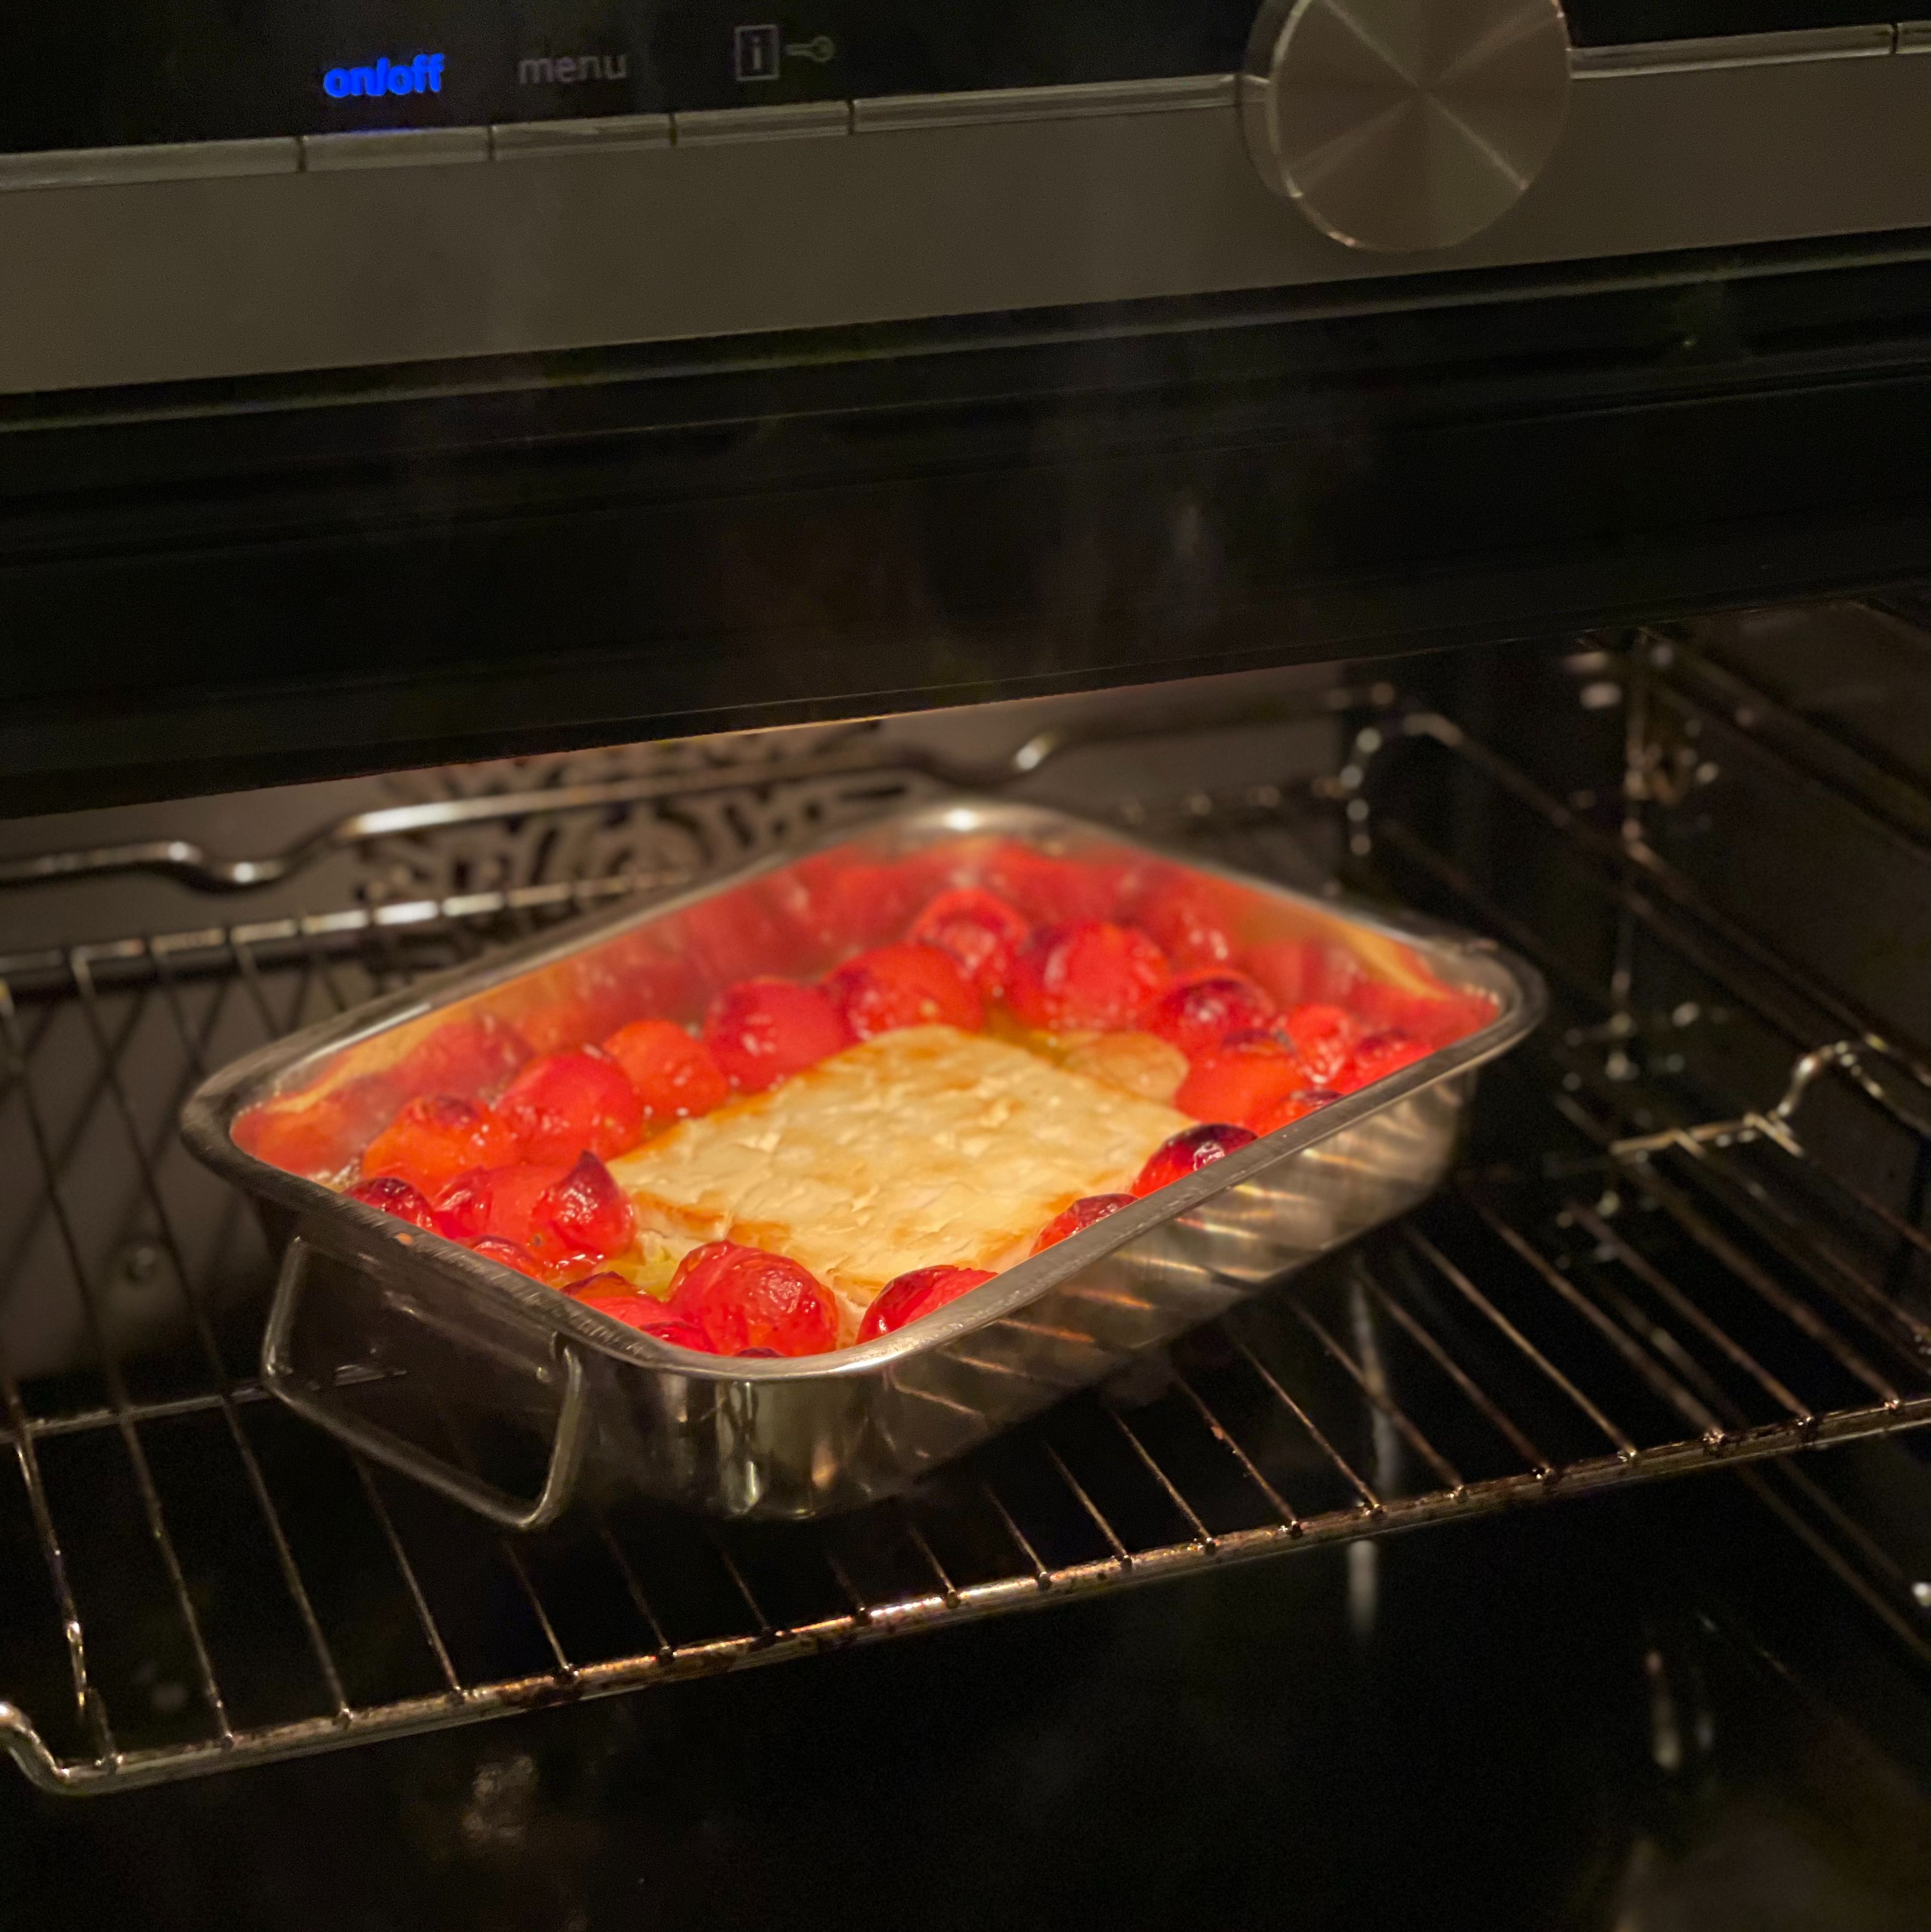 Take you baking tray from the oven and add a dash of pasta water from your cooking pasta. Mix the mixture crushing your tomato’s to prepare your sauce.